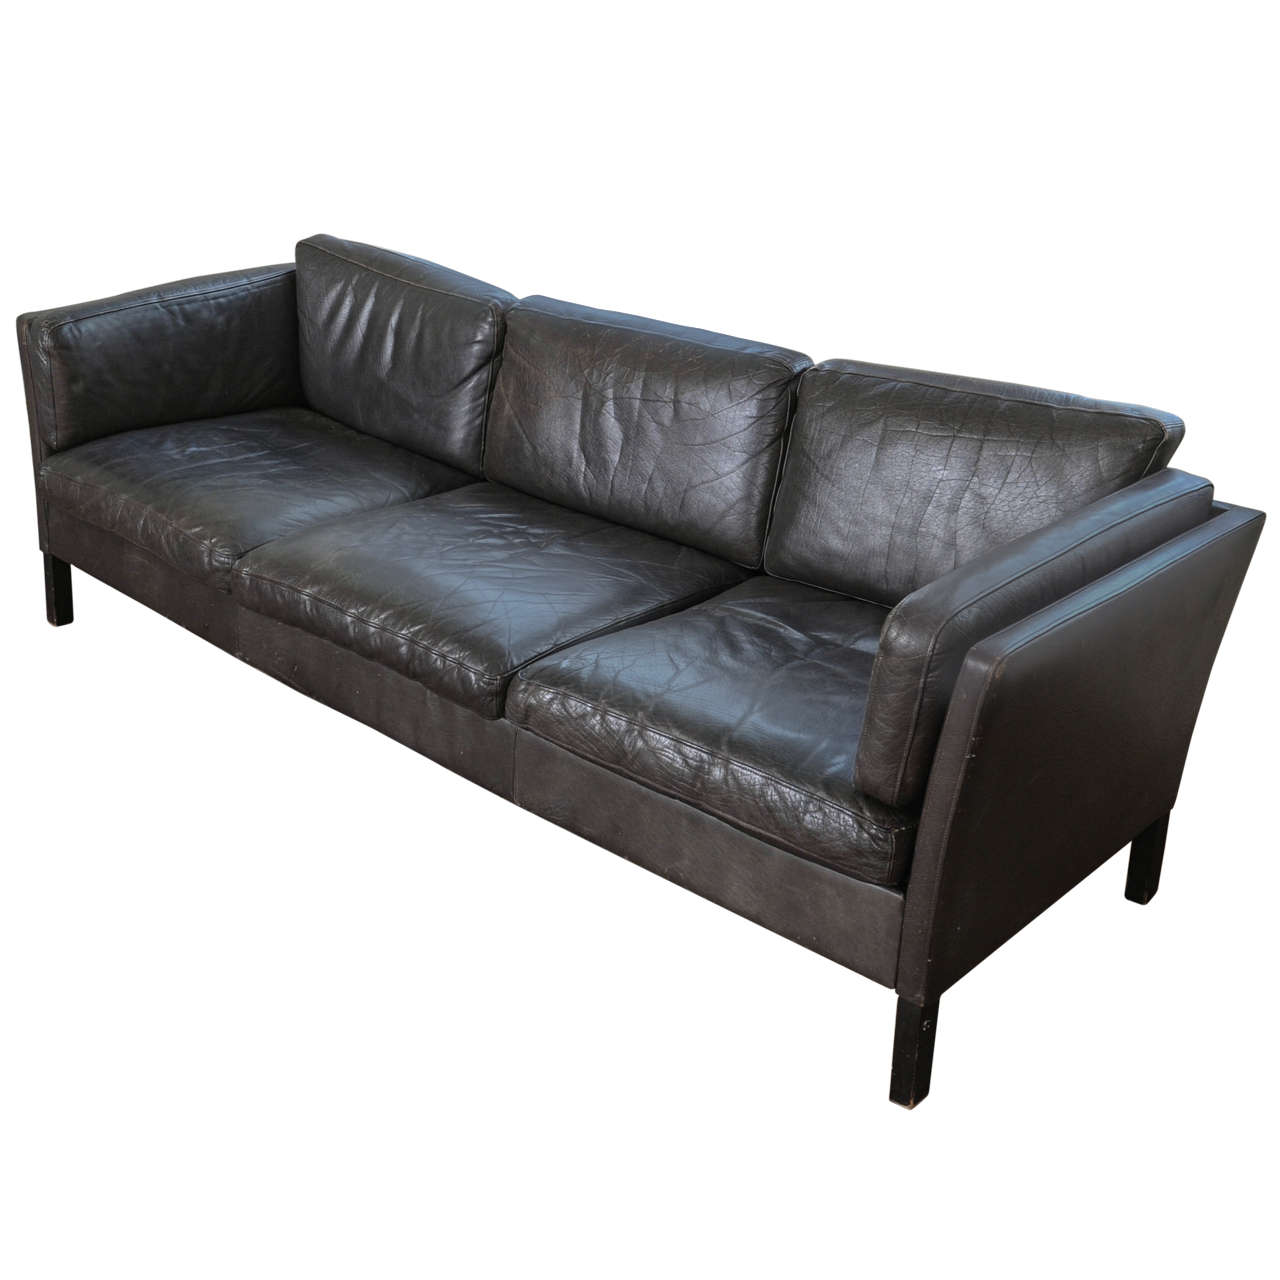 1960s Danish Three-Seat Vintage Design Sofa with Black Leather Upholstered